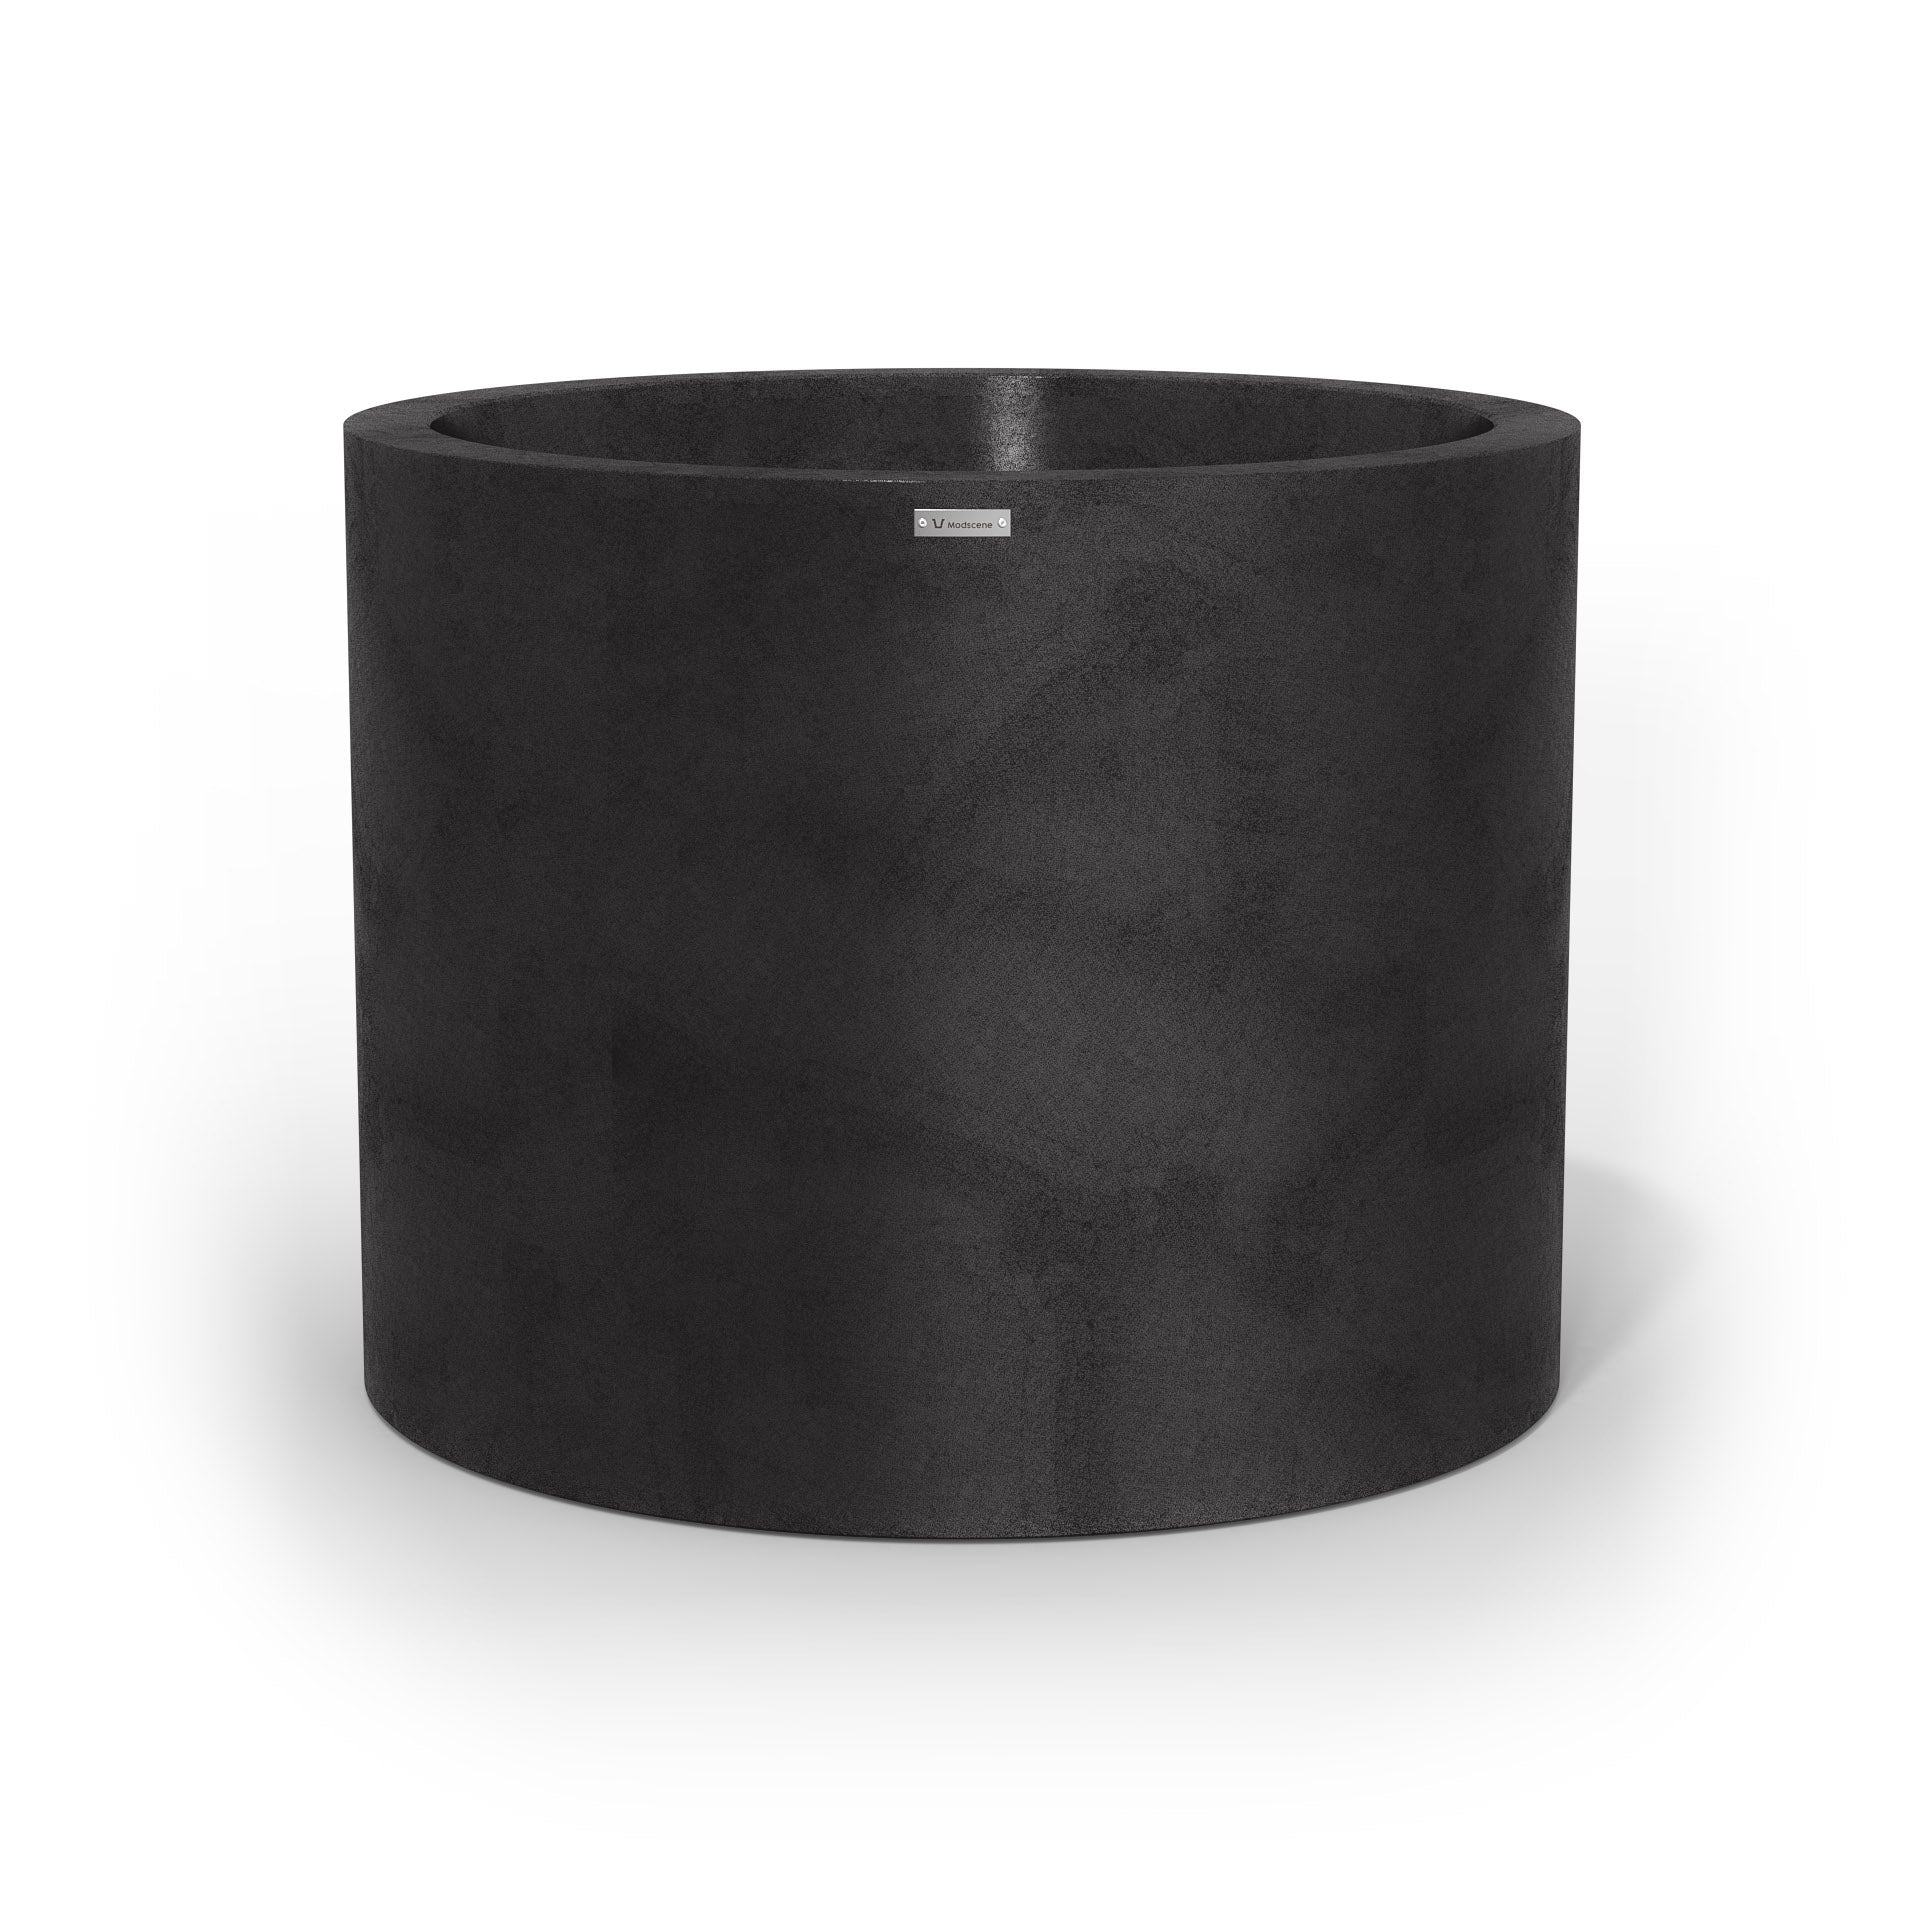 An extra large cylinder pot planter in a matte black colour. Made by Modscene NZ.